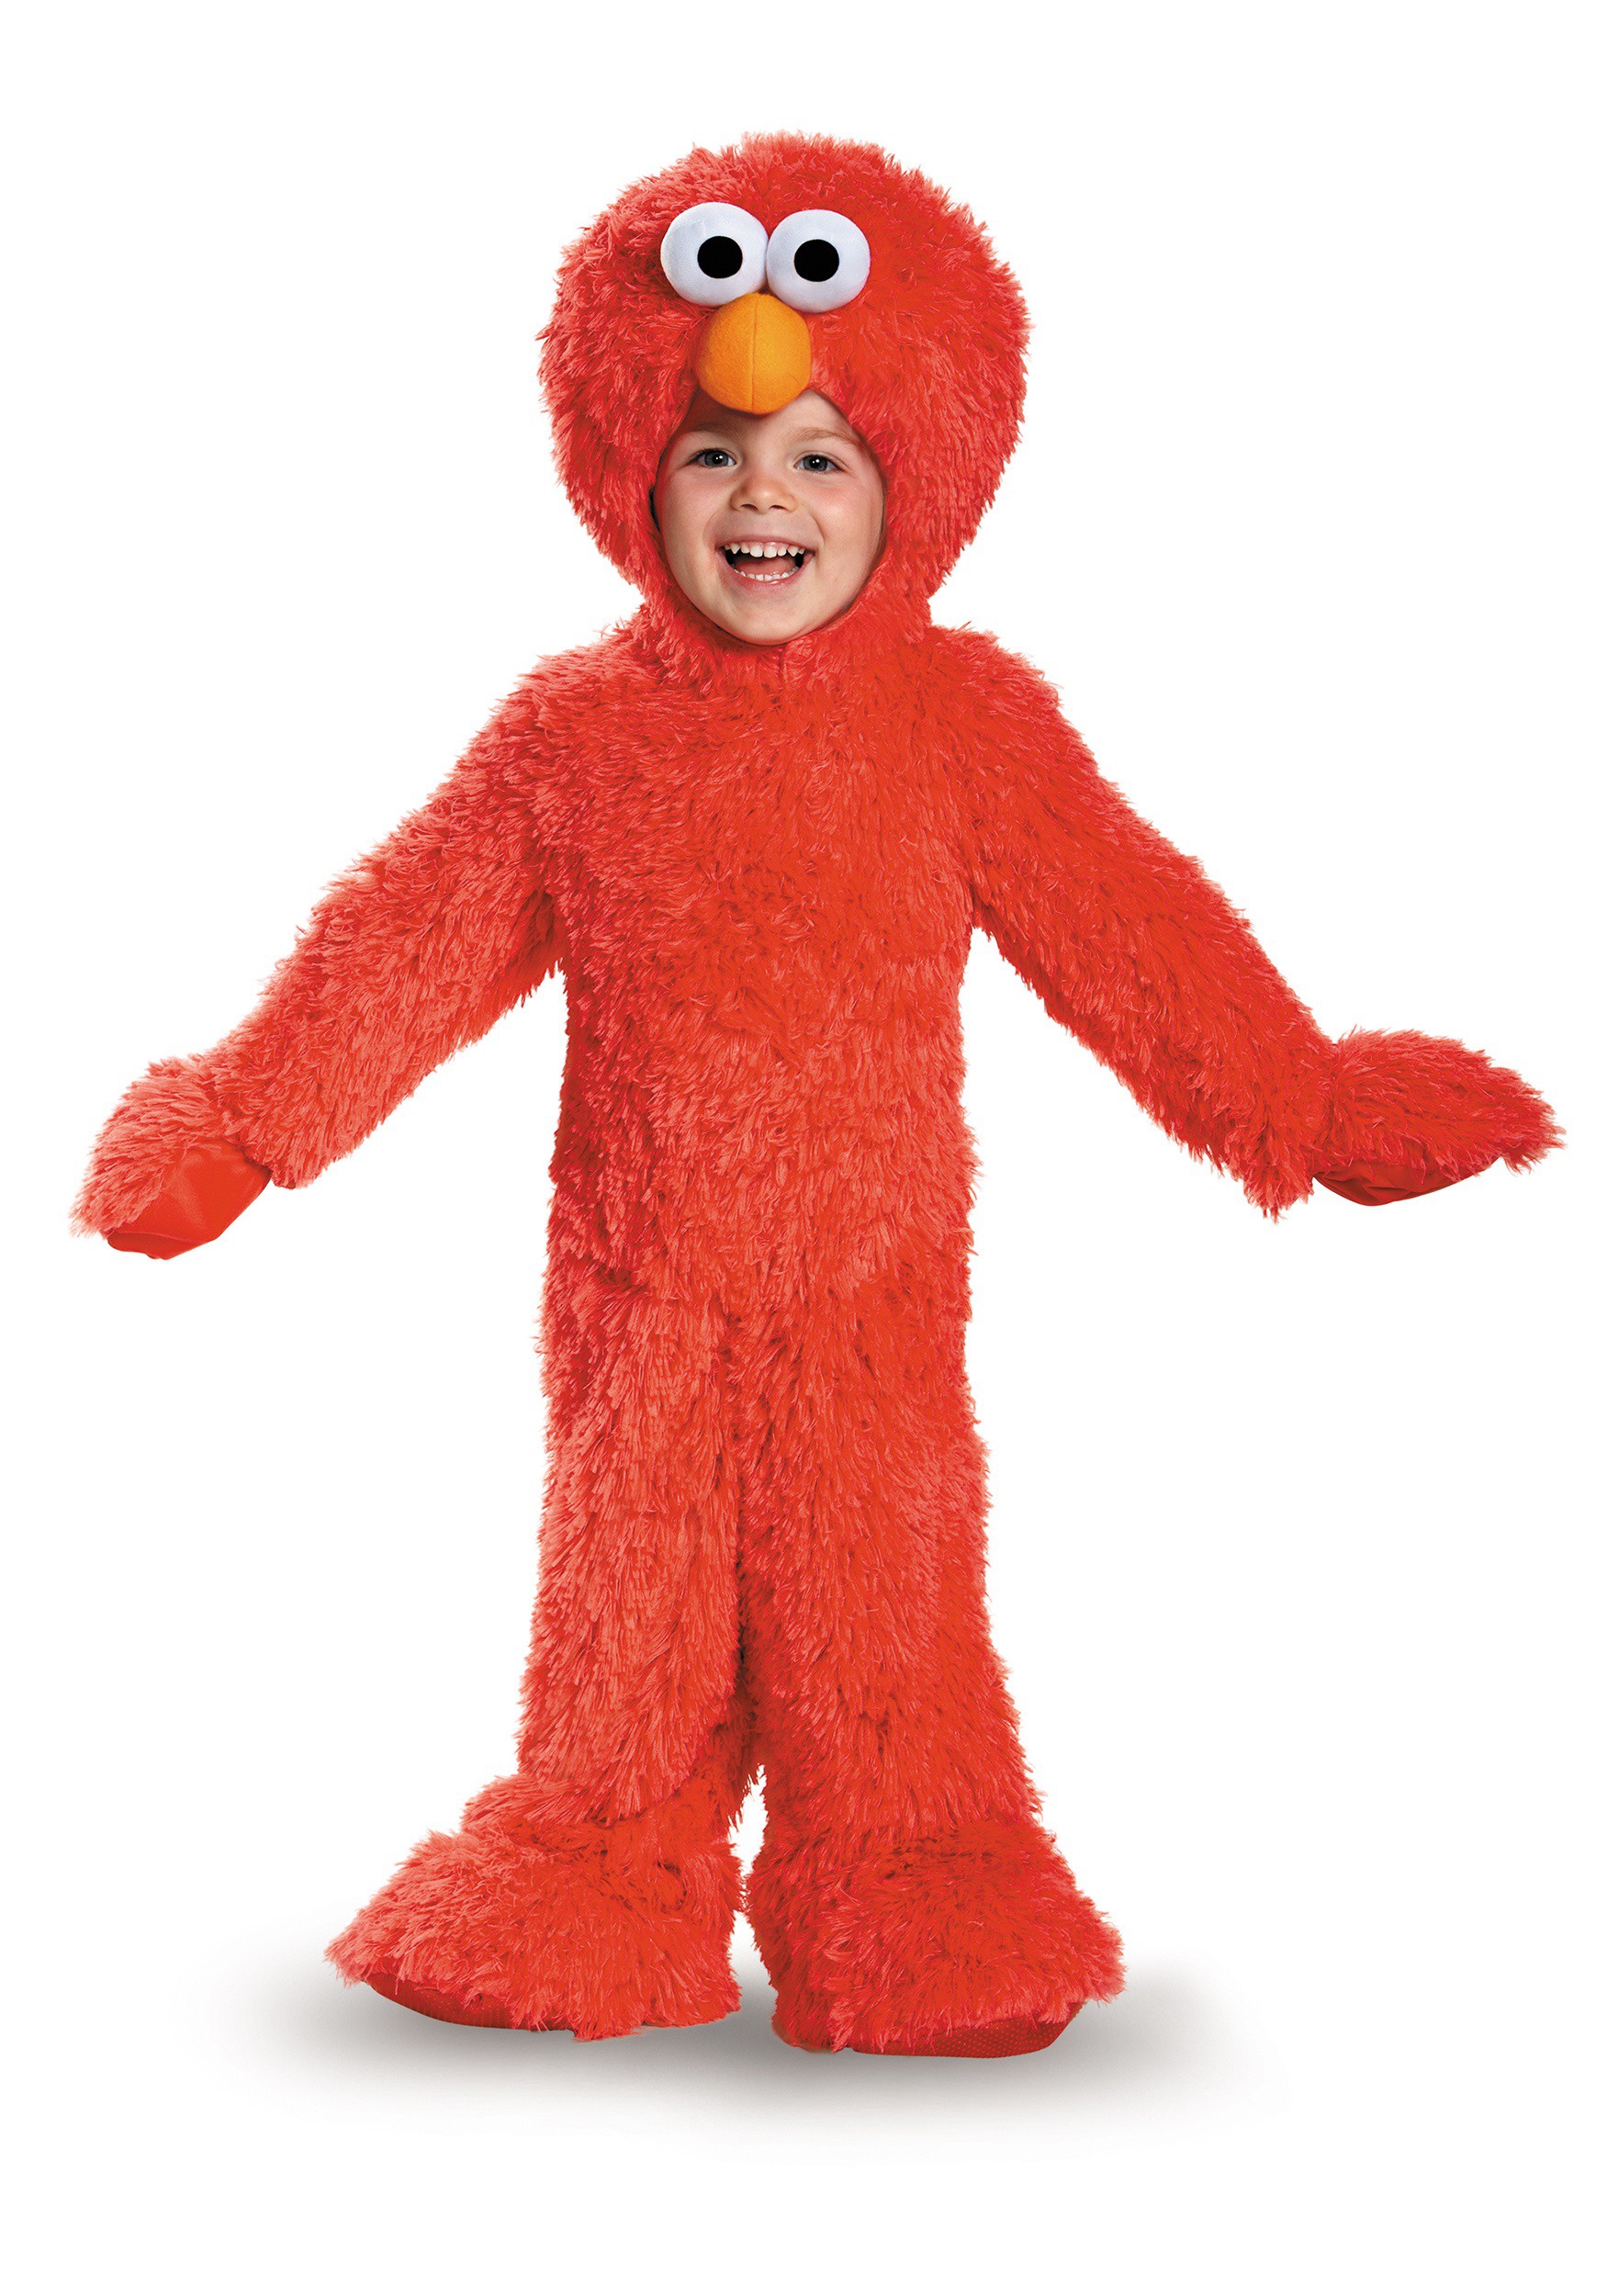 Elmo Costume Rental For Adults 83